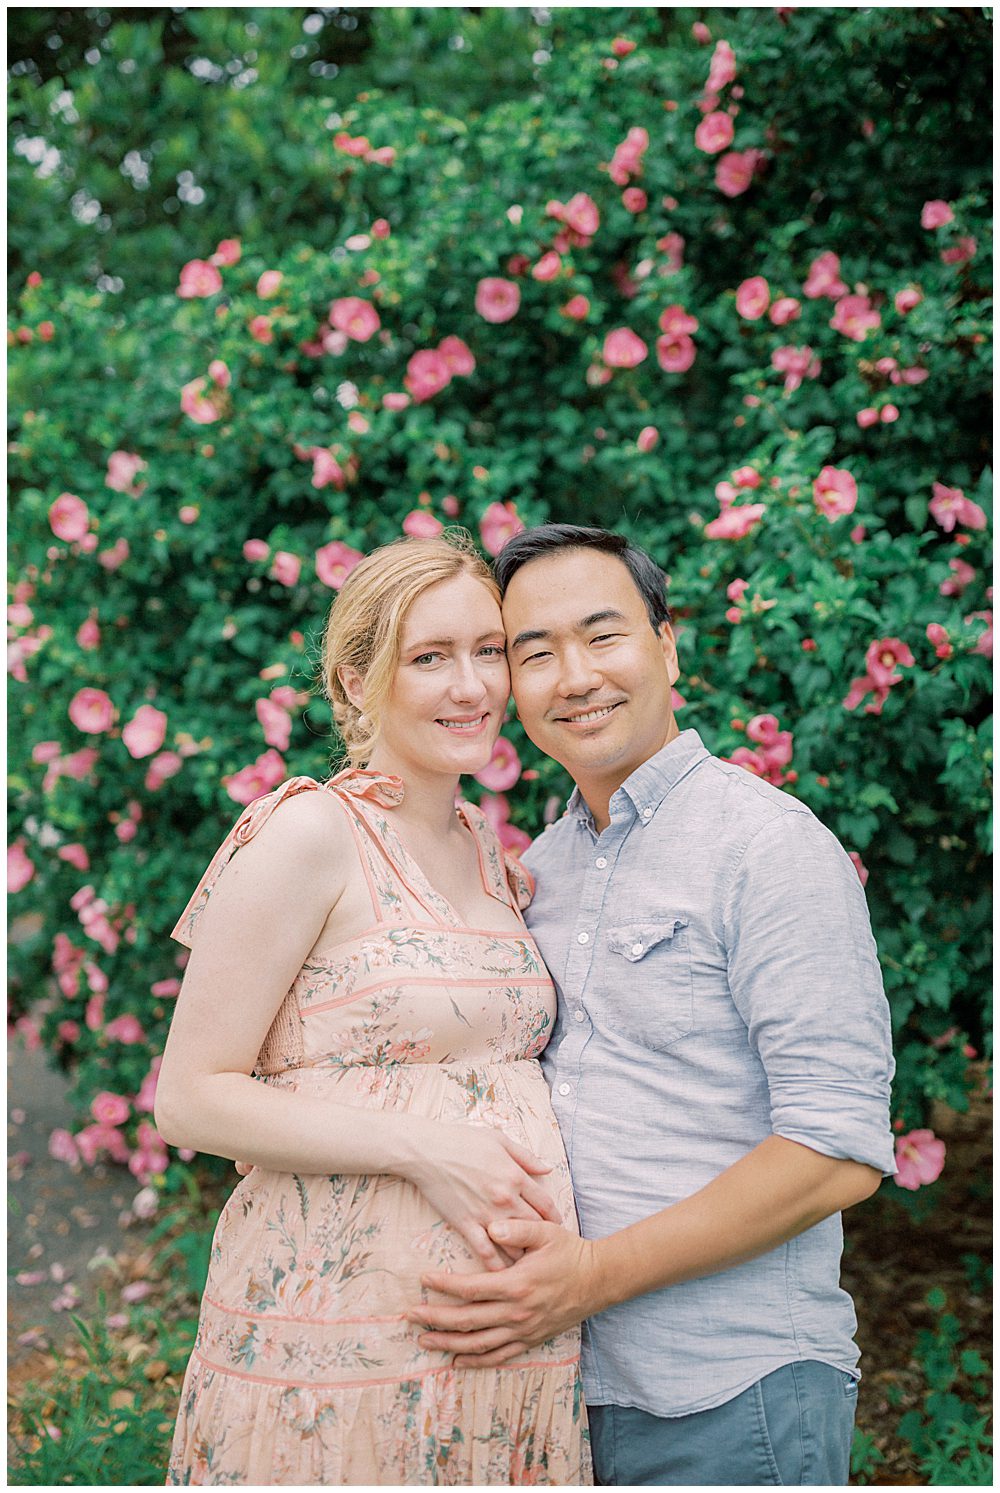 Expecting parents lean into one another and smile while standing in front of a rose bush.